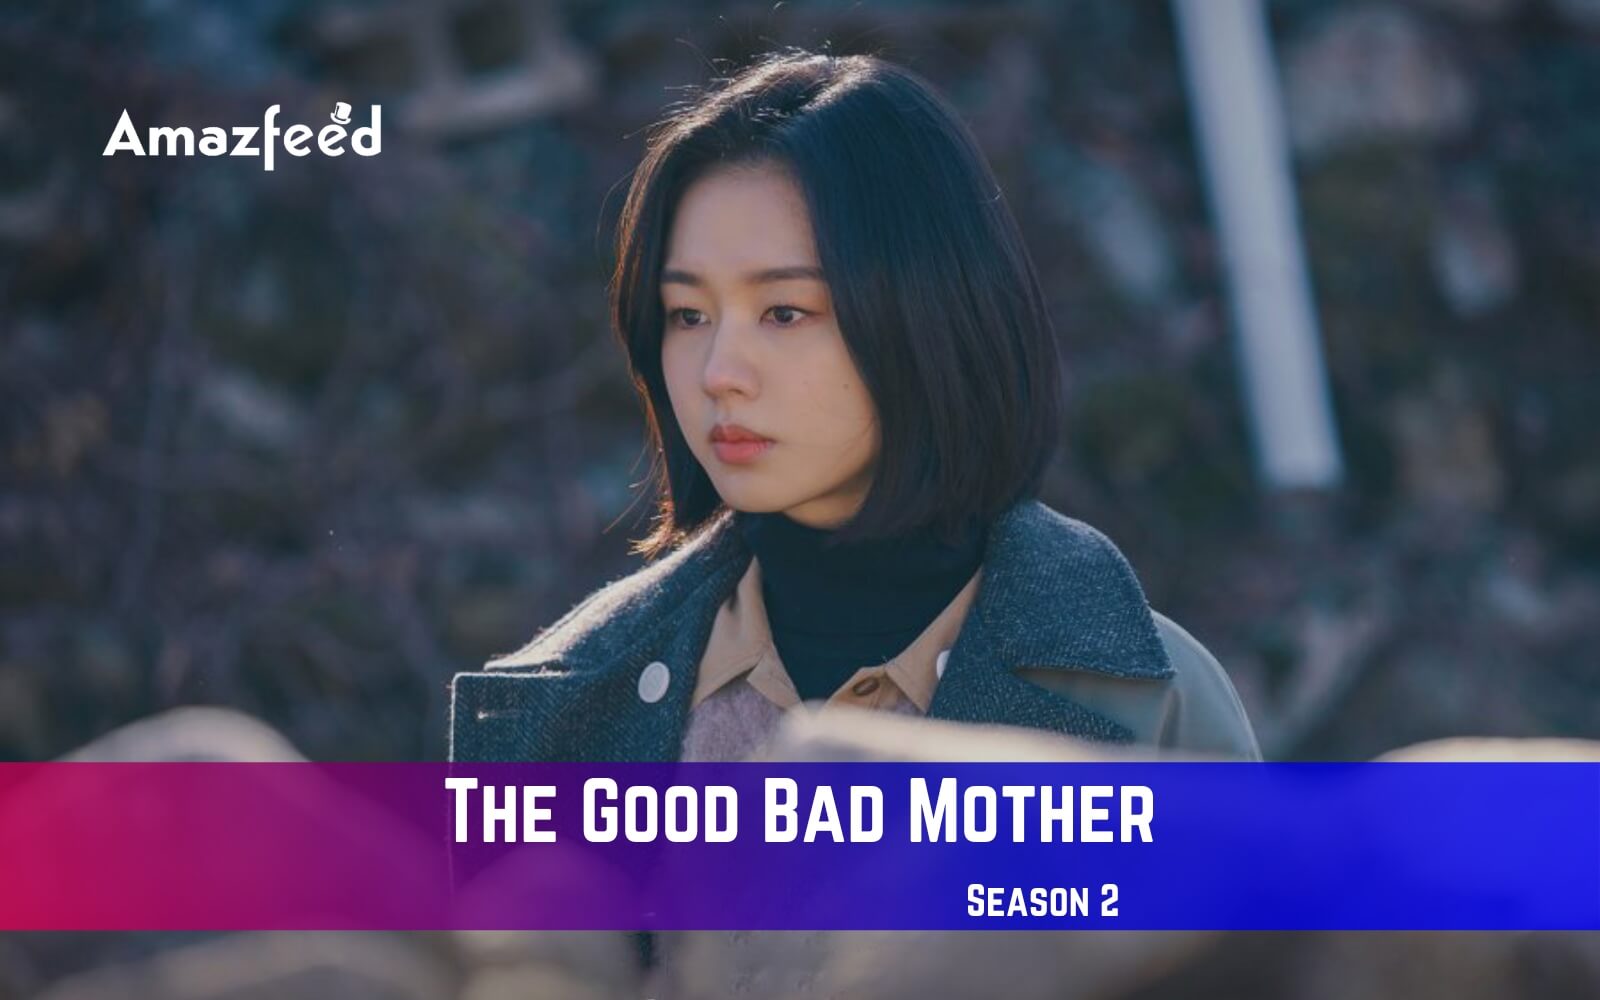 The Good Bad Mother season 2 Release Date